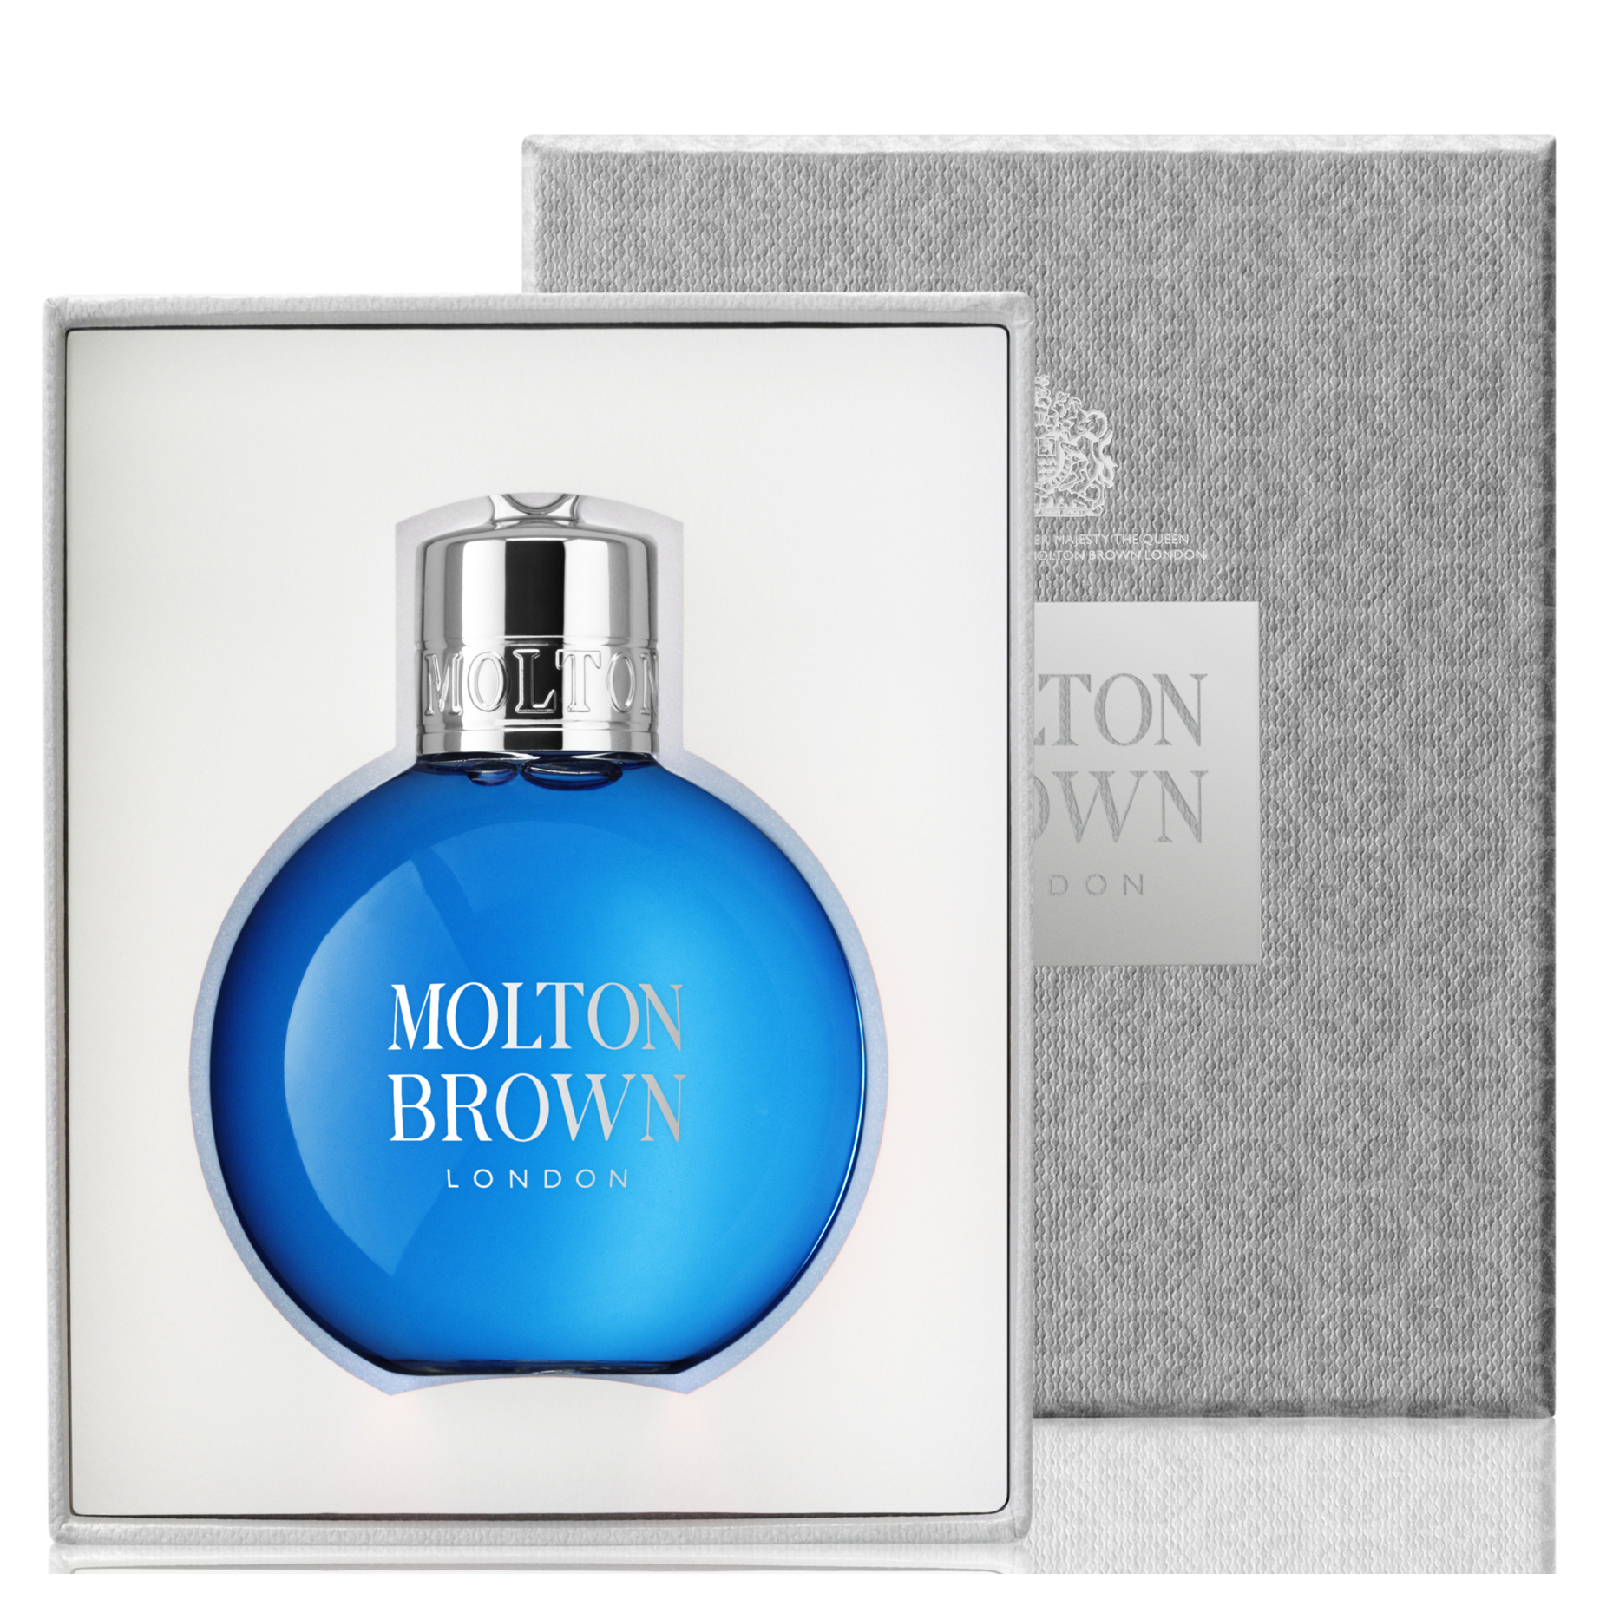 Molton Brown Templetree Festive Bauble